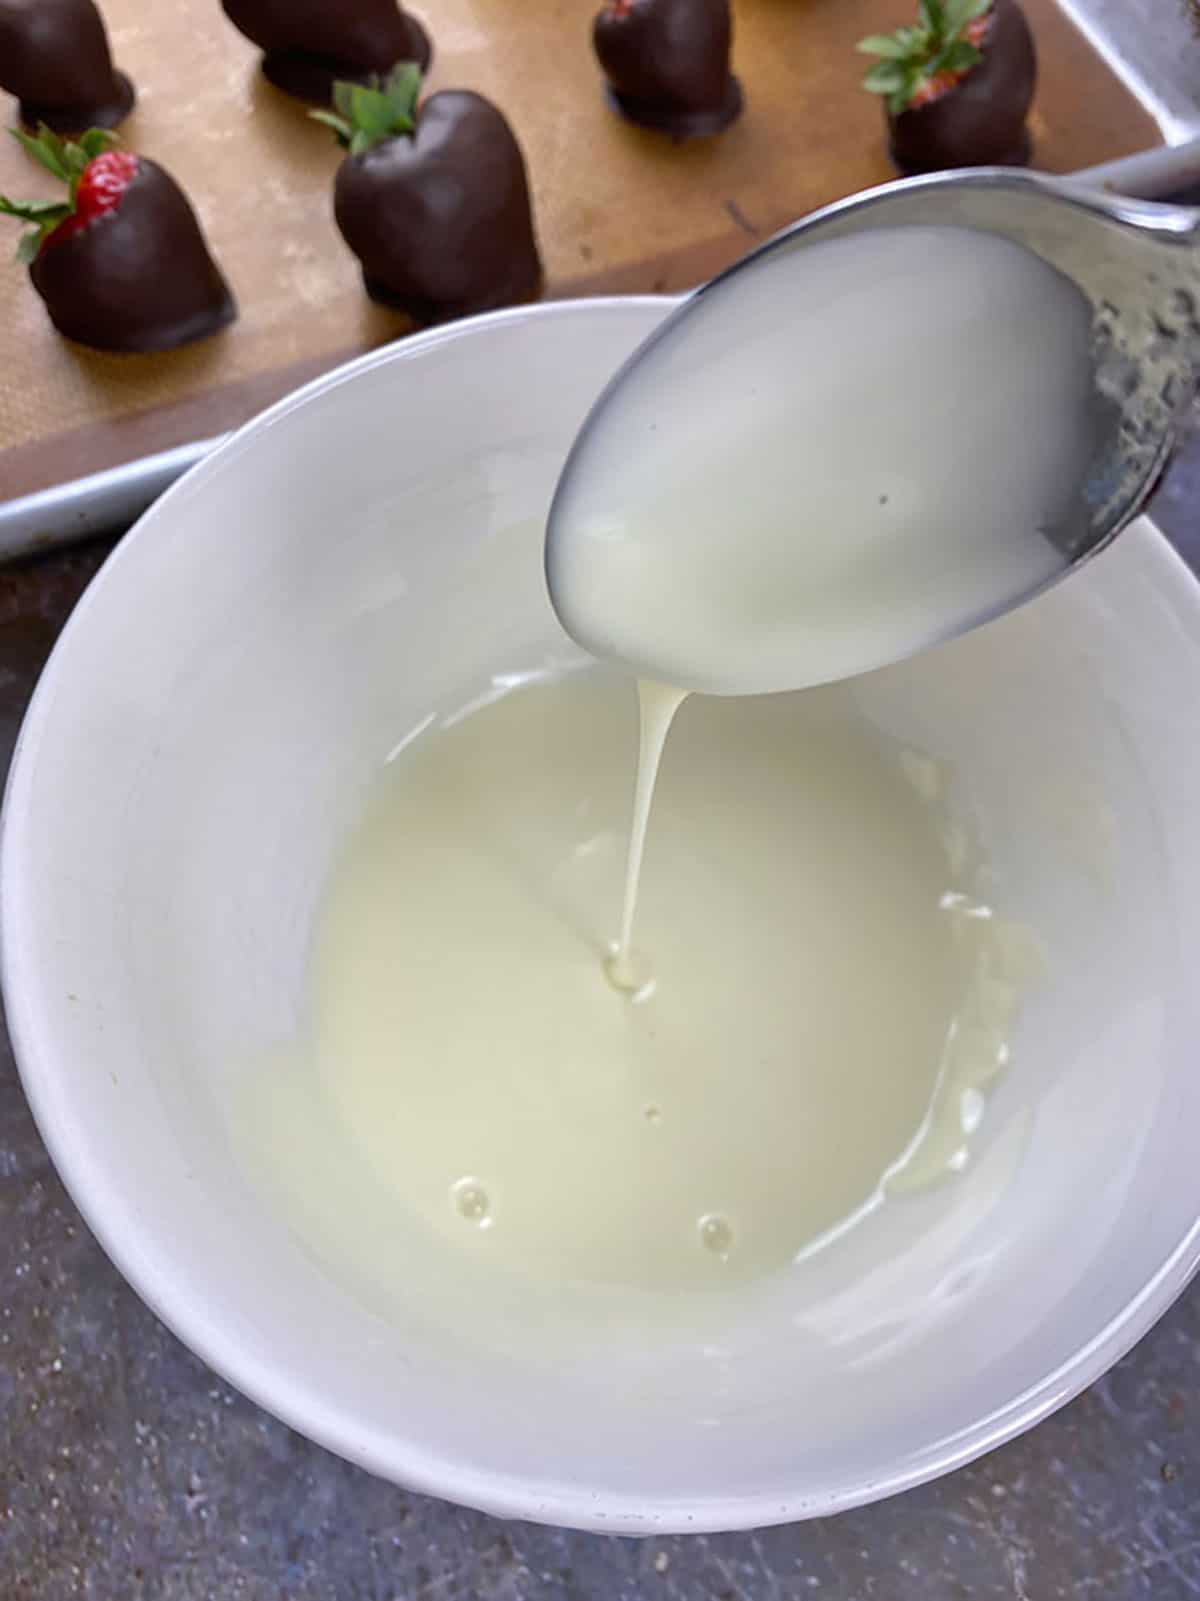 White chocolate chips melted in a bowl.